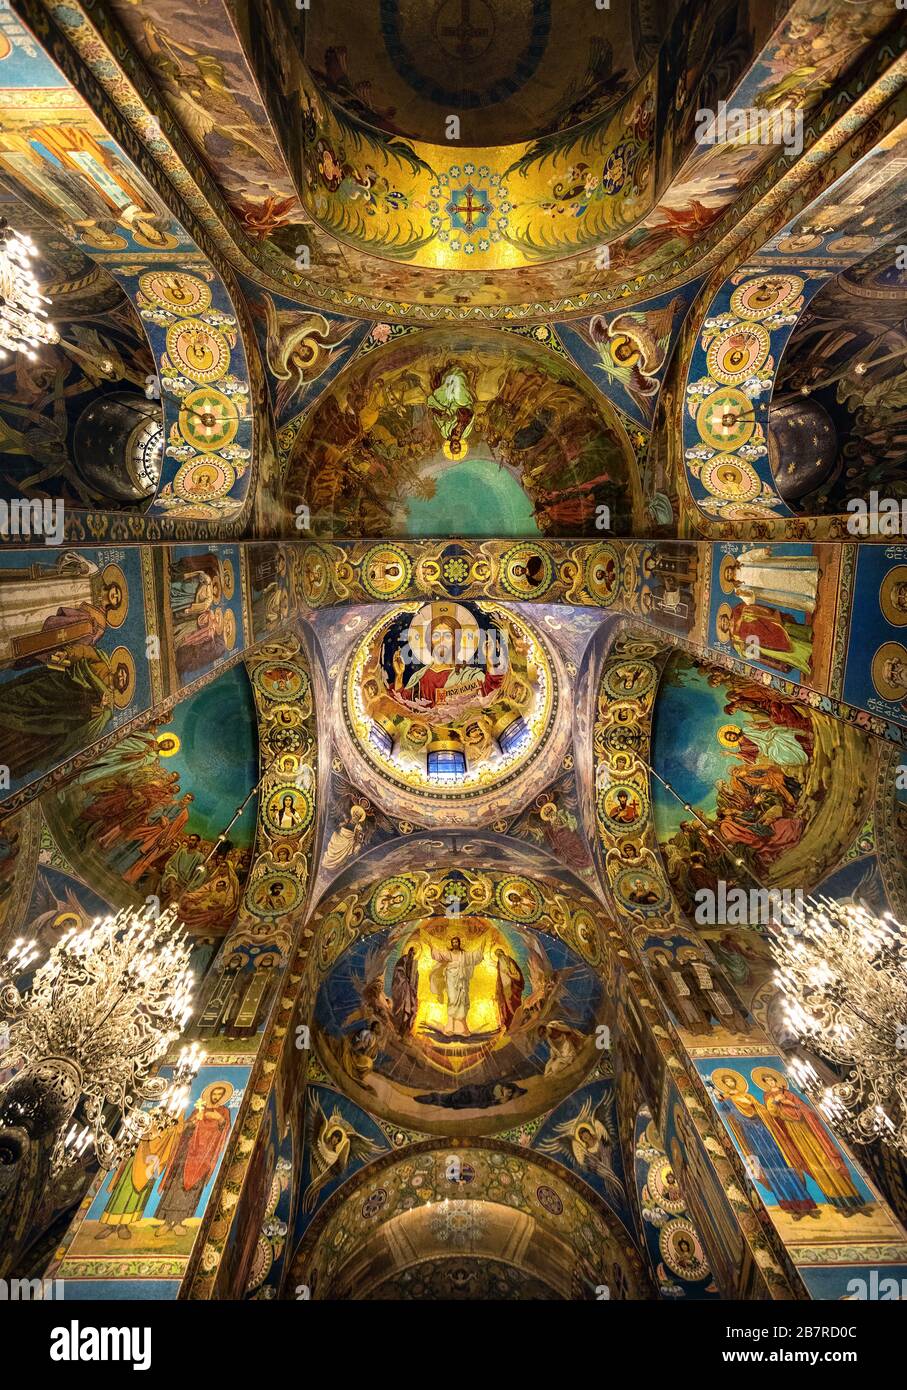 Interior of the Church of the Savior on Spilled Blood in Saint Petersburg, Russia Stock Photo